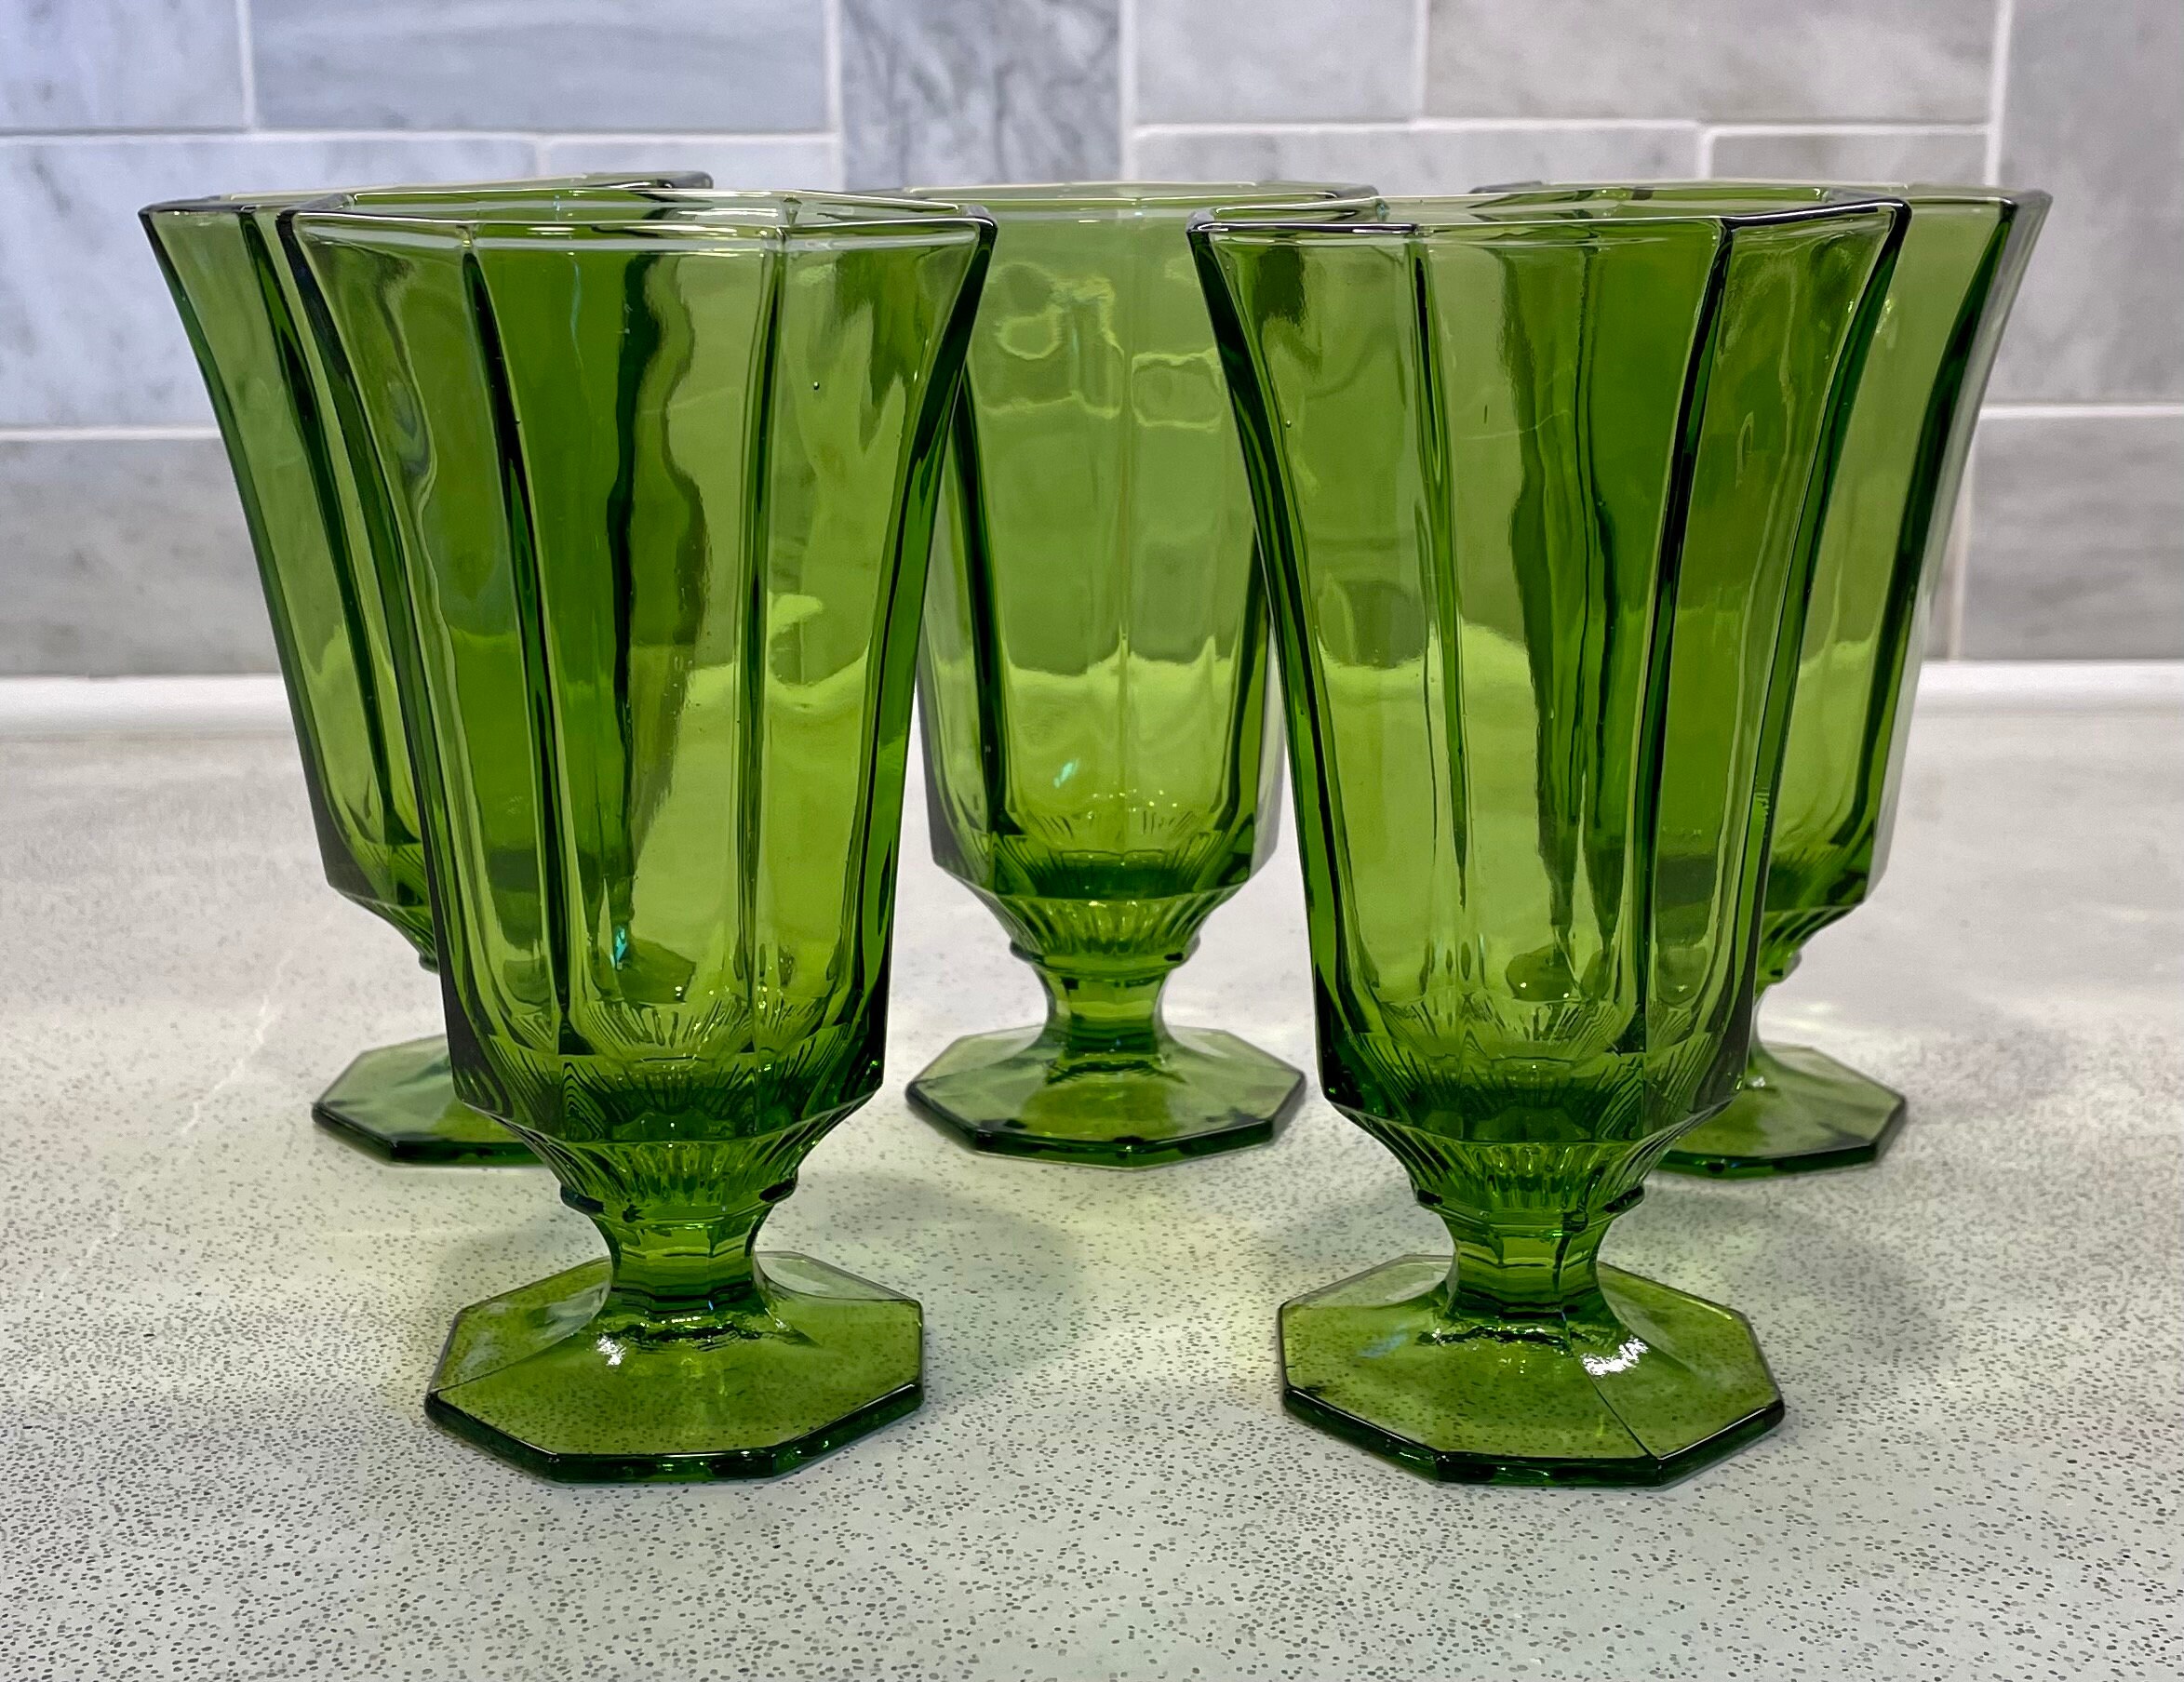 Set of 5 Vintage Green Wine Glasses Heavy Thick 10 ounce Ice Tea or Water Goblets from the 1970's